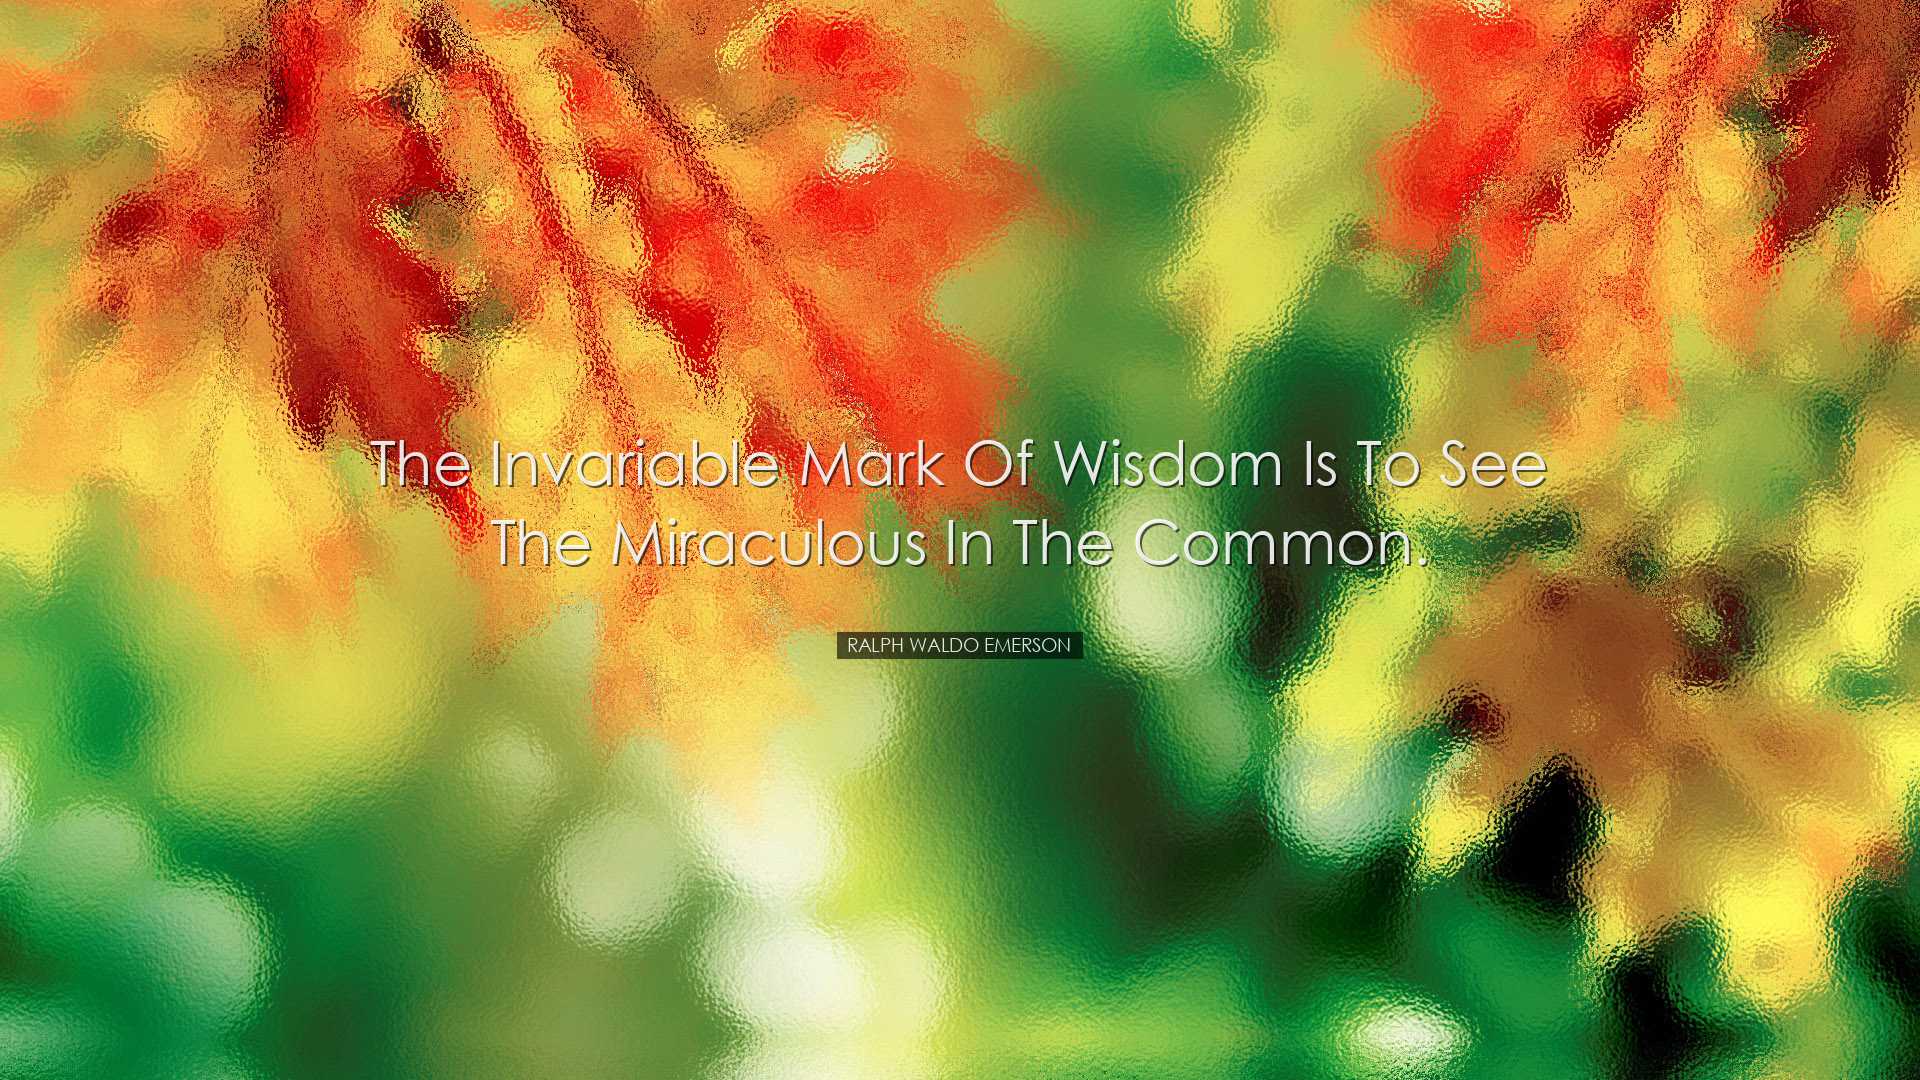 The invariable mark of wisdom is to see the miraculous in the comm